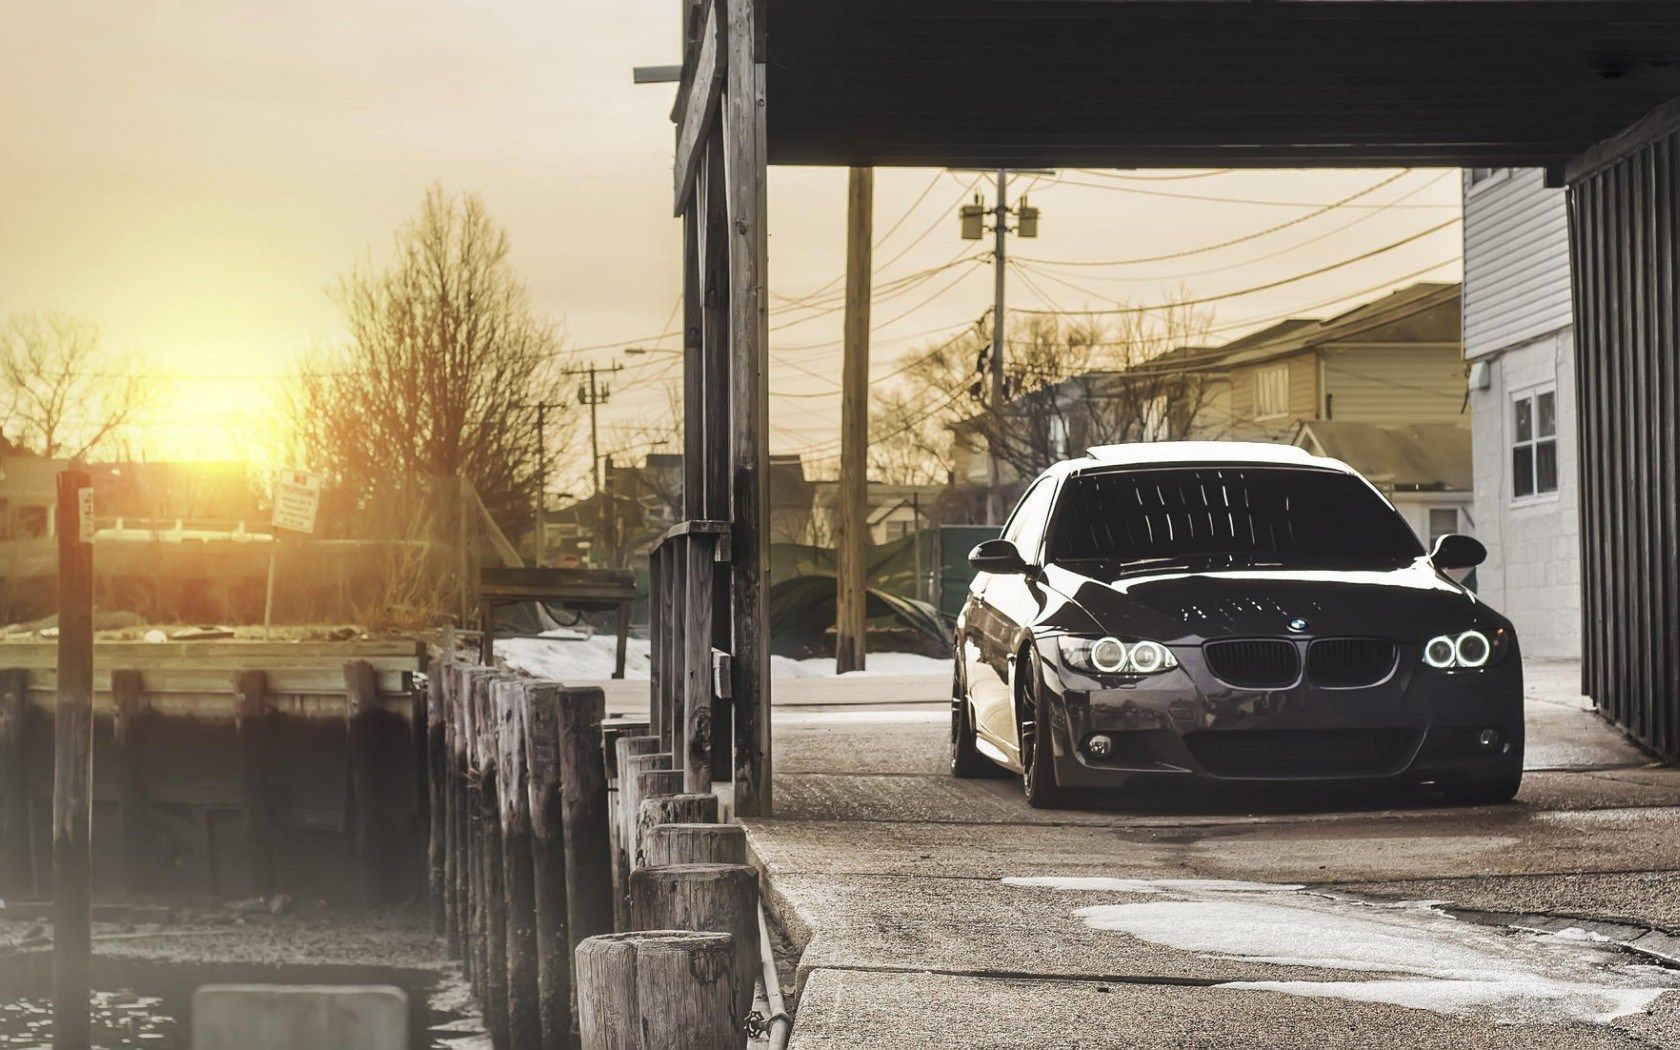 Bmw 320I Wallpapers